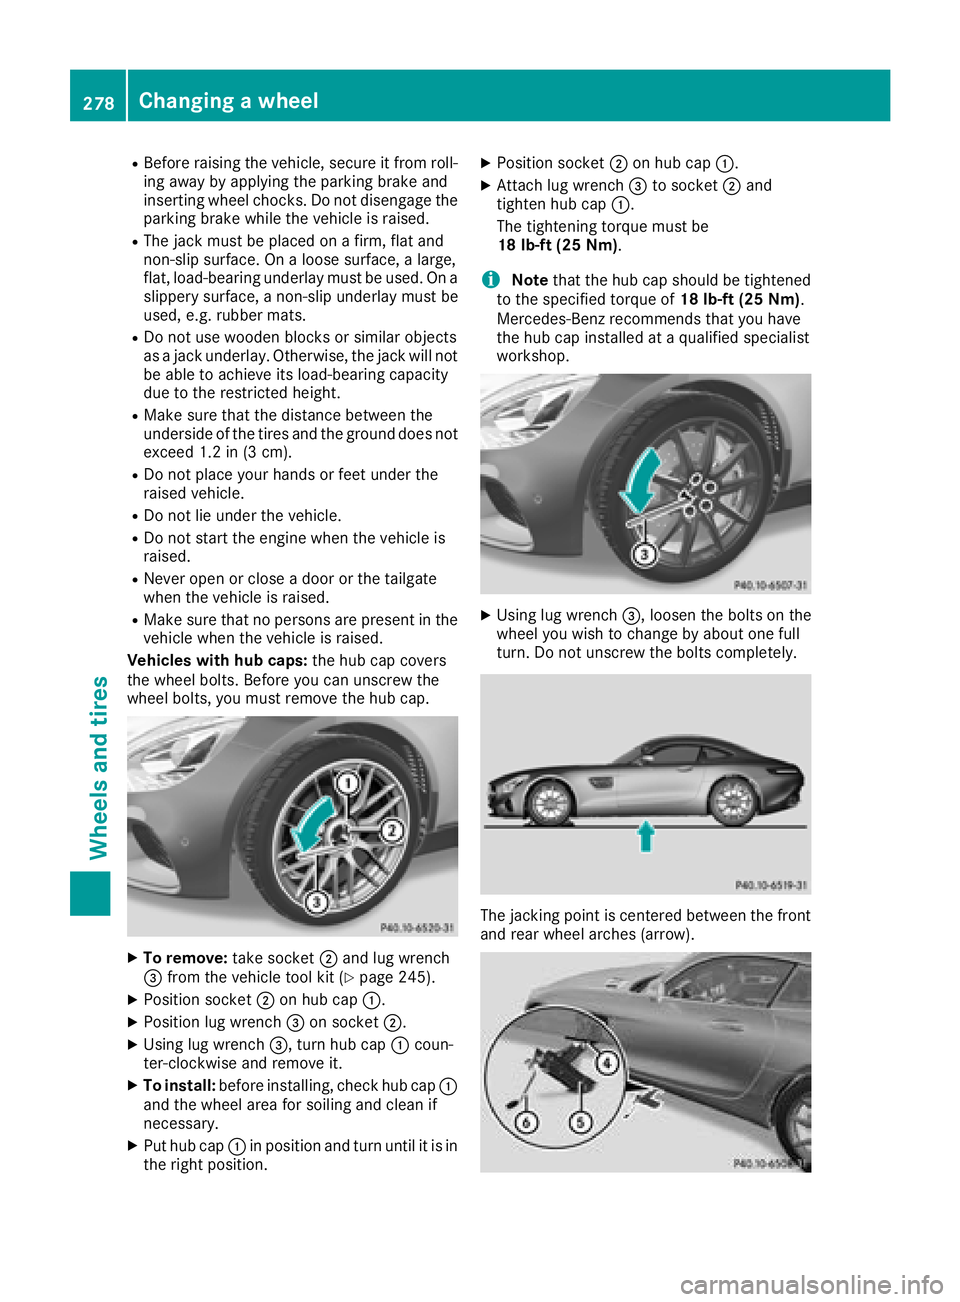 MERCEDES-BENZ AMG GT COUPE 2018  Owners Manual RBefore raising the vehicle, secure it from roll-
ing away by applying the parking brake and
inserting wheel chocks. Do not disengage the
parking brake while the vehicle is raised.
RThe jack must be p